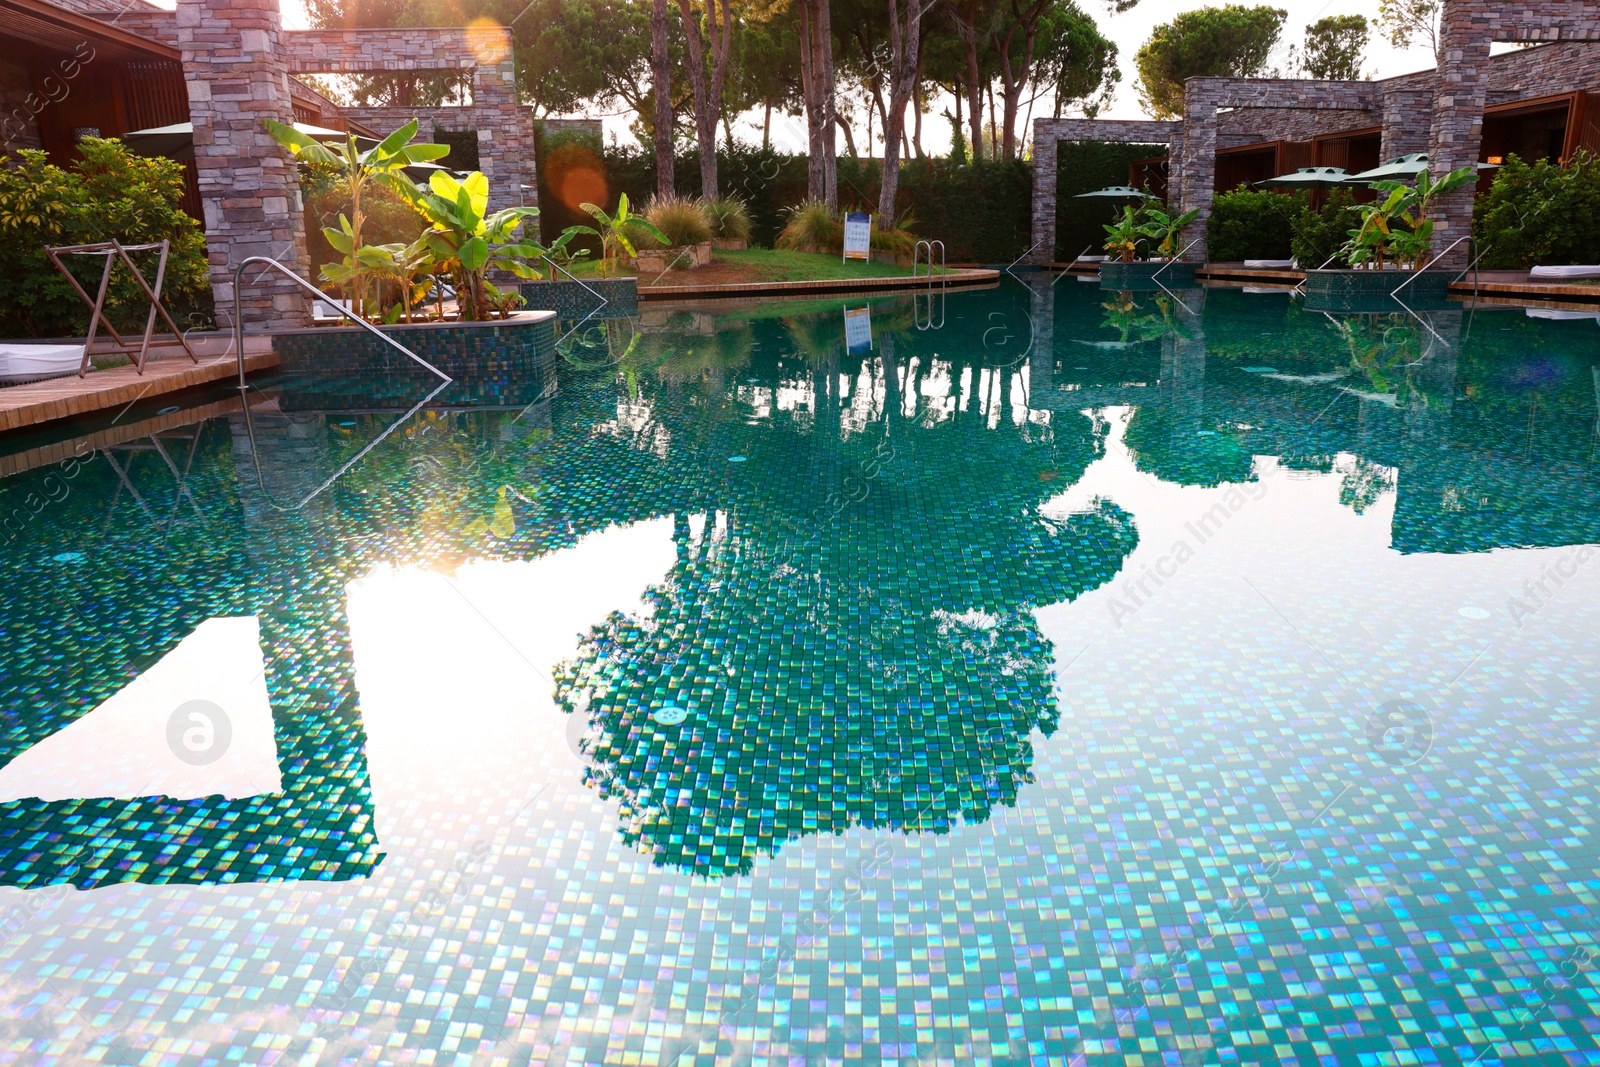 Photo of Outdoor swimming pool with umbrellas and sunbeds at resort